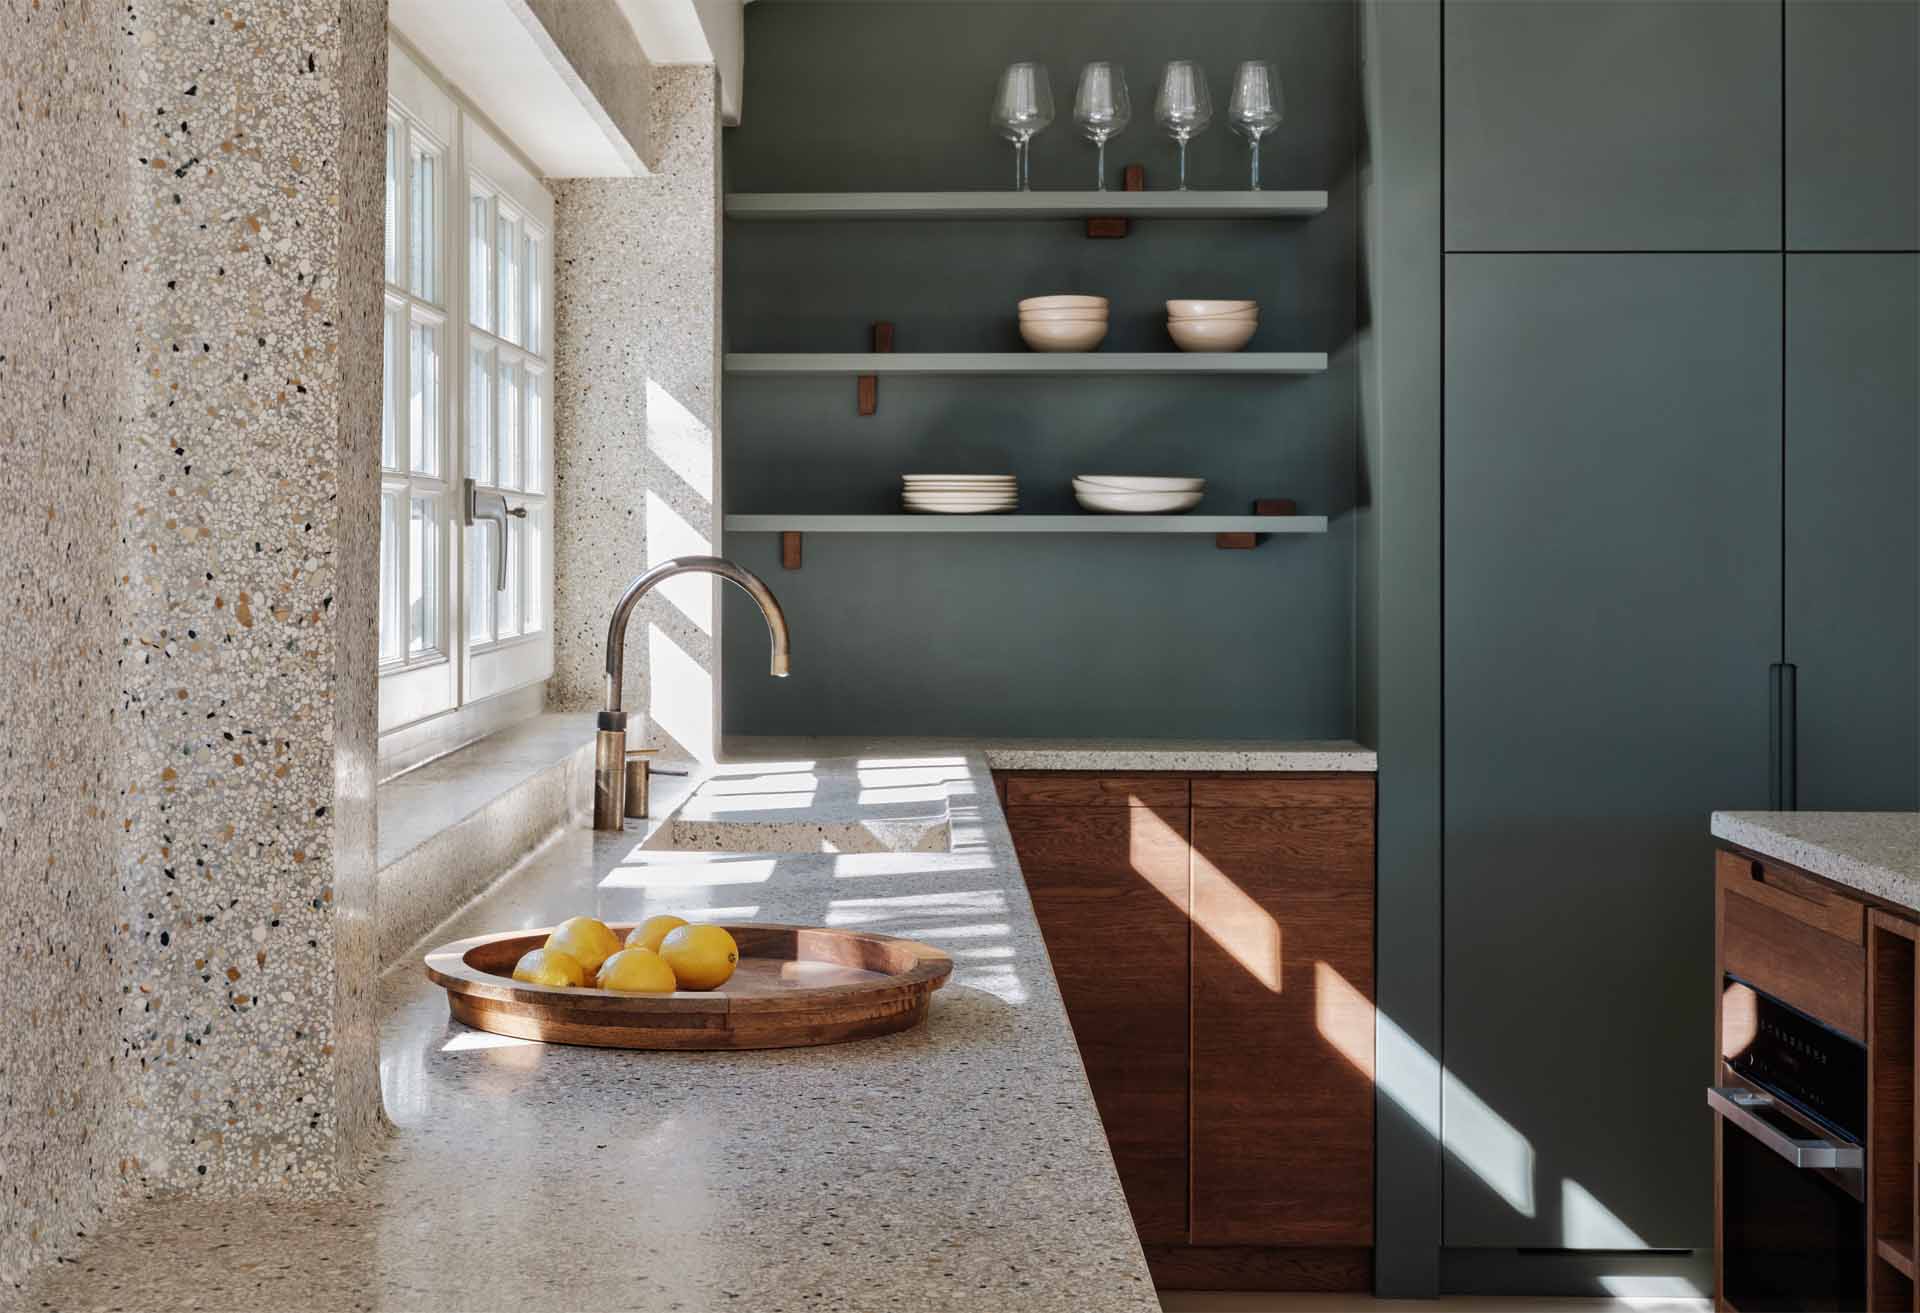 A modern kitchen with dark wood and matte green cabinets, also includes a seamless terrazzo countertop and integrated sink, that then travels up onto the wall.